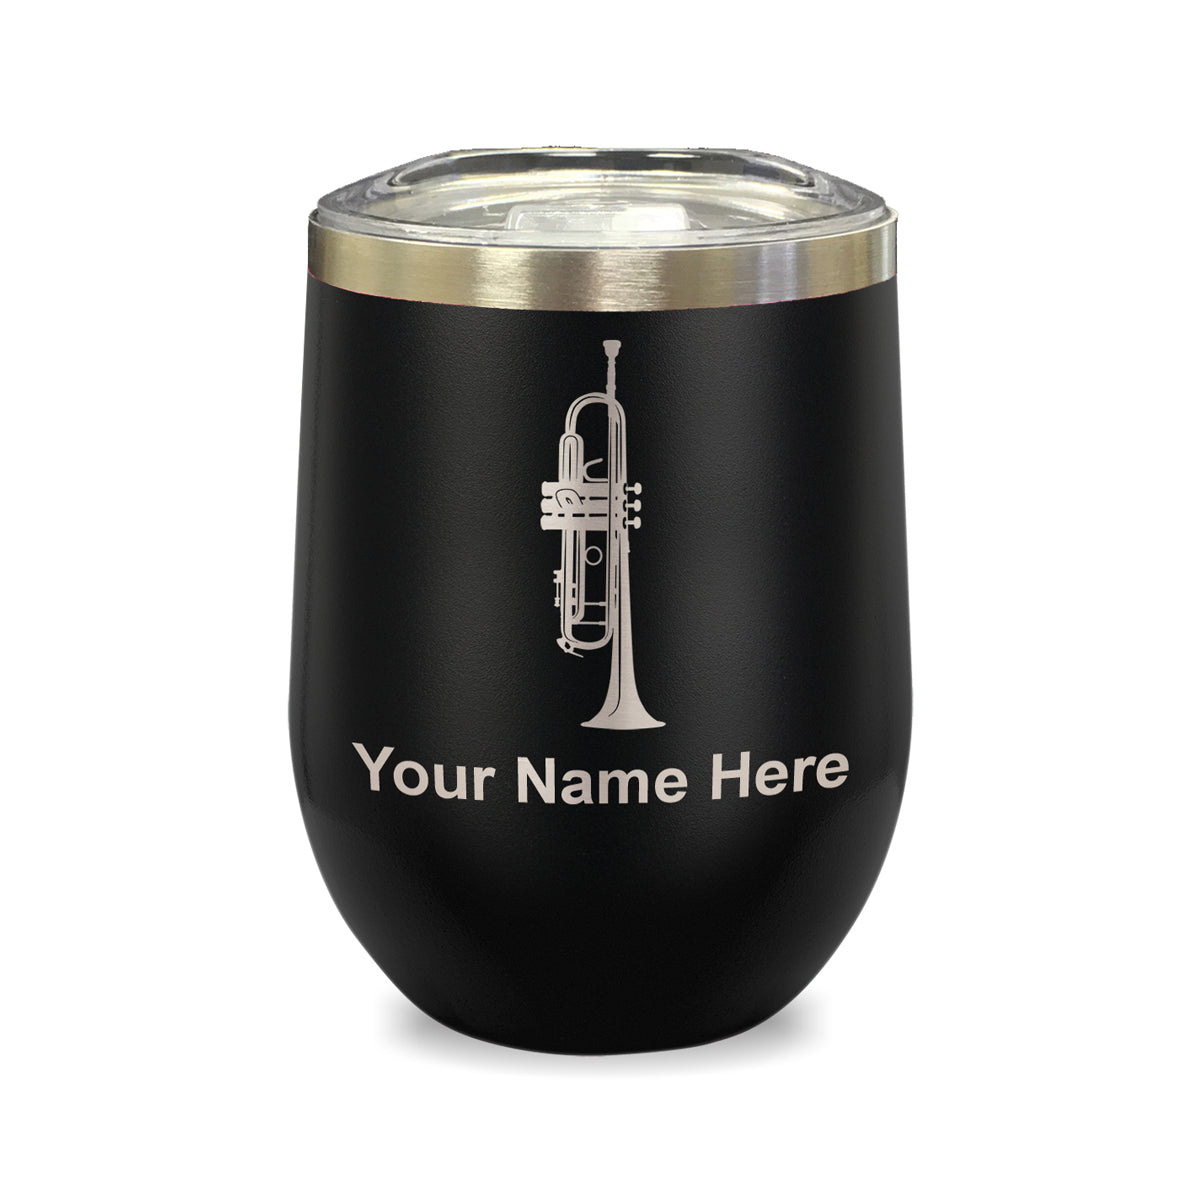 LaserGram Double Wall Stainless Steel Wine Glass, Trumpet, Personalized Engraving Included